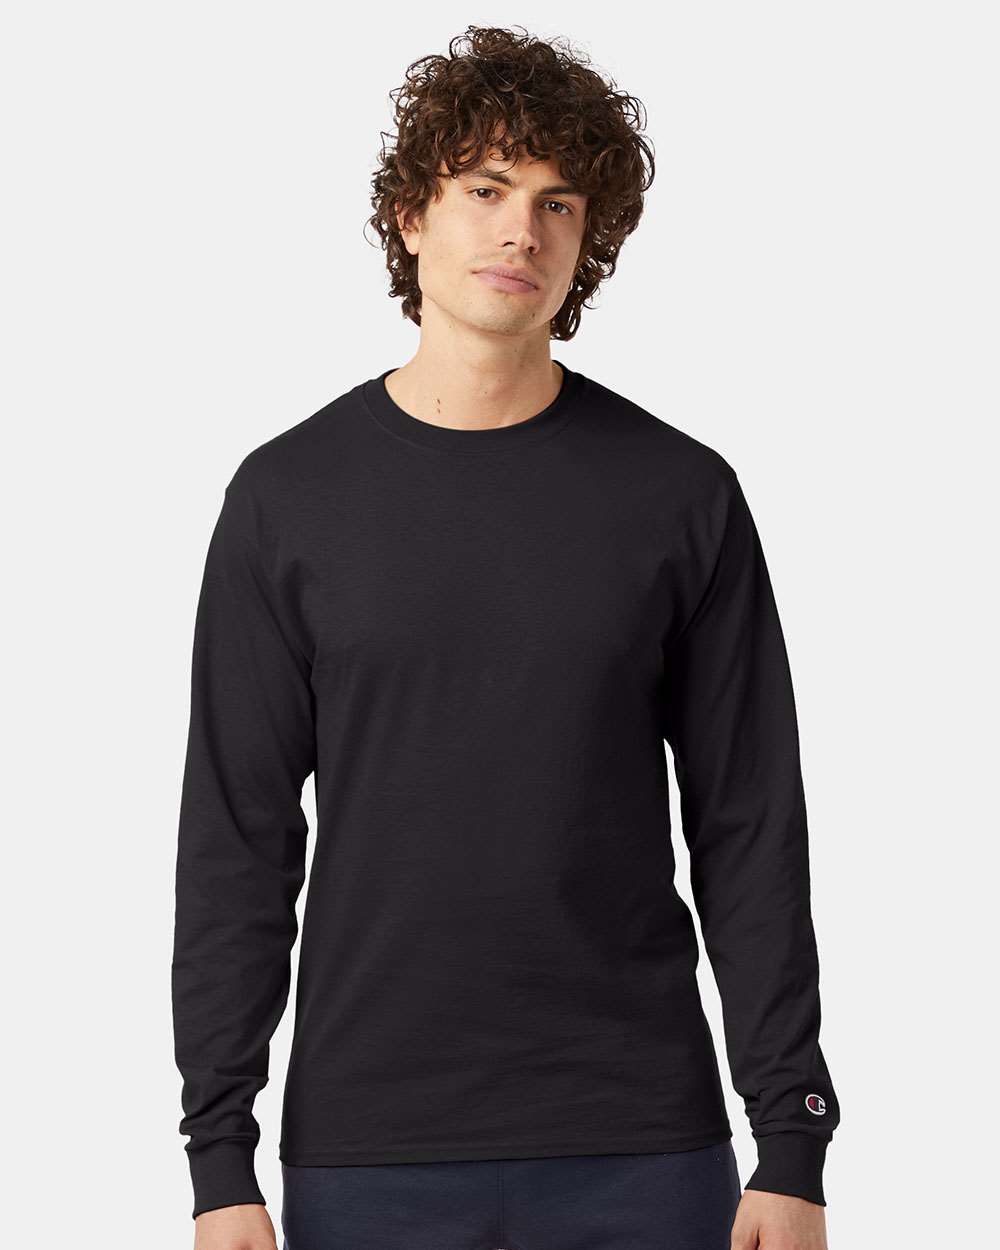 Premium Long Sleeve T-Shirt, Soft Fabric Tee, crafted with premium 5.2  oz./yd² 100% cotton for a comfortable and durable wear